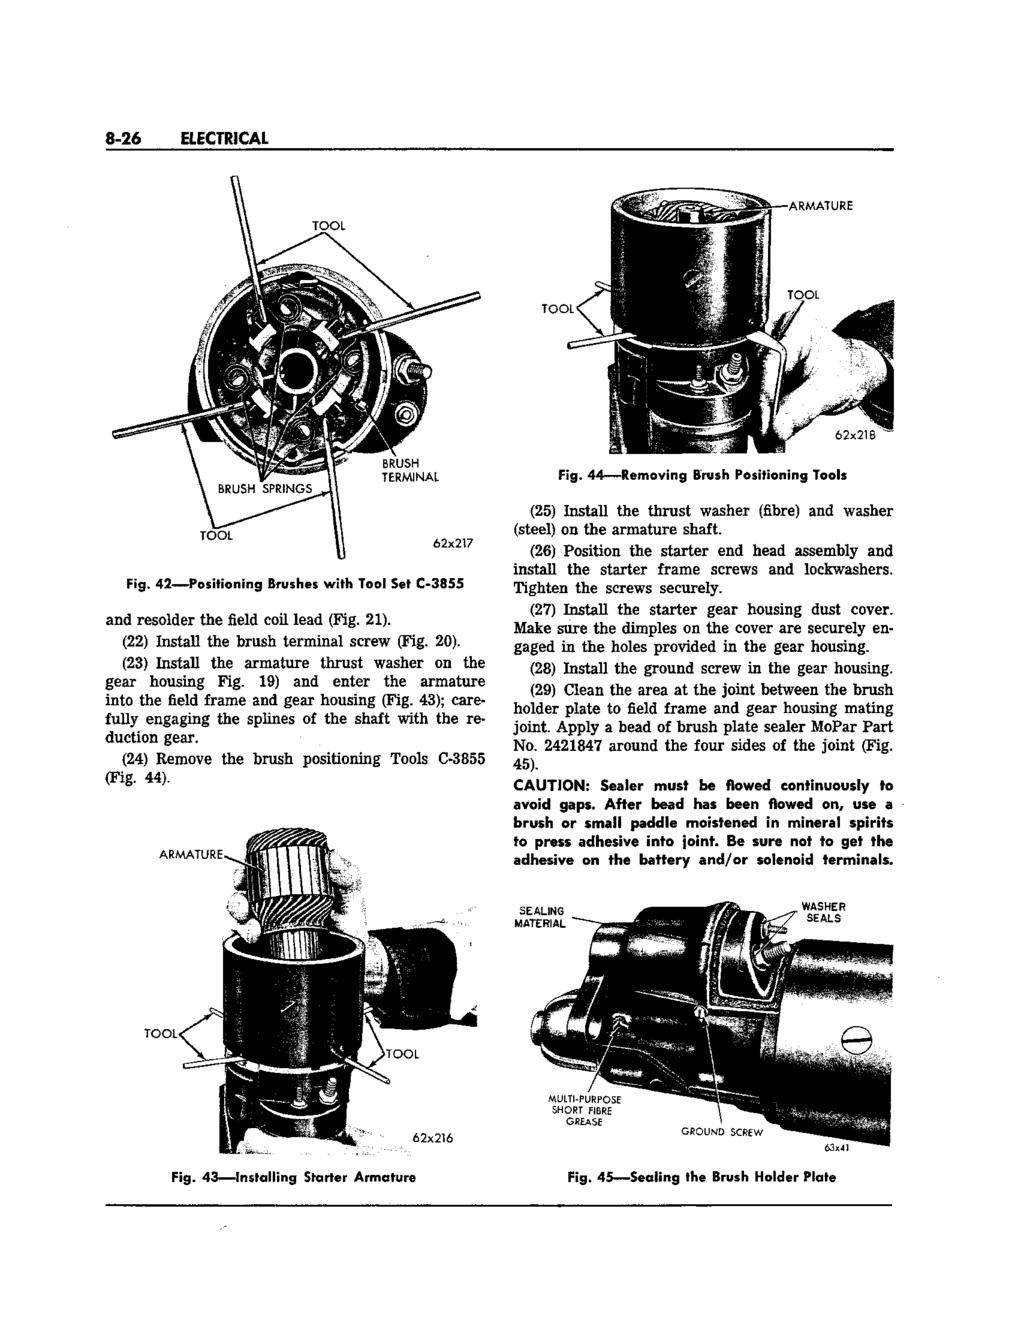 8-26 ELECTRICAL Fig. 42 Positioning Brushes with Tool Set C-3855 and resolder the field coil lead (Fig. 21). (22) Install the brush terminal screw (Fig. 20).